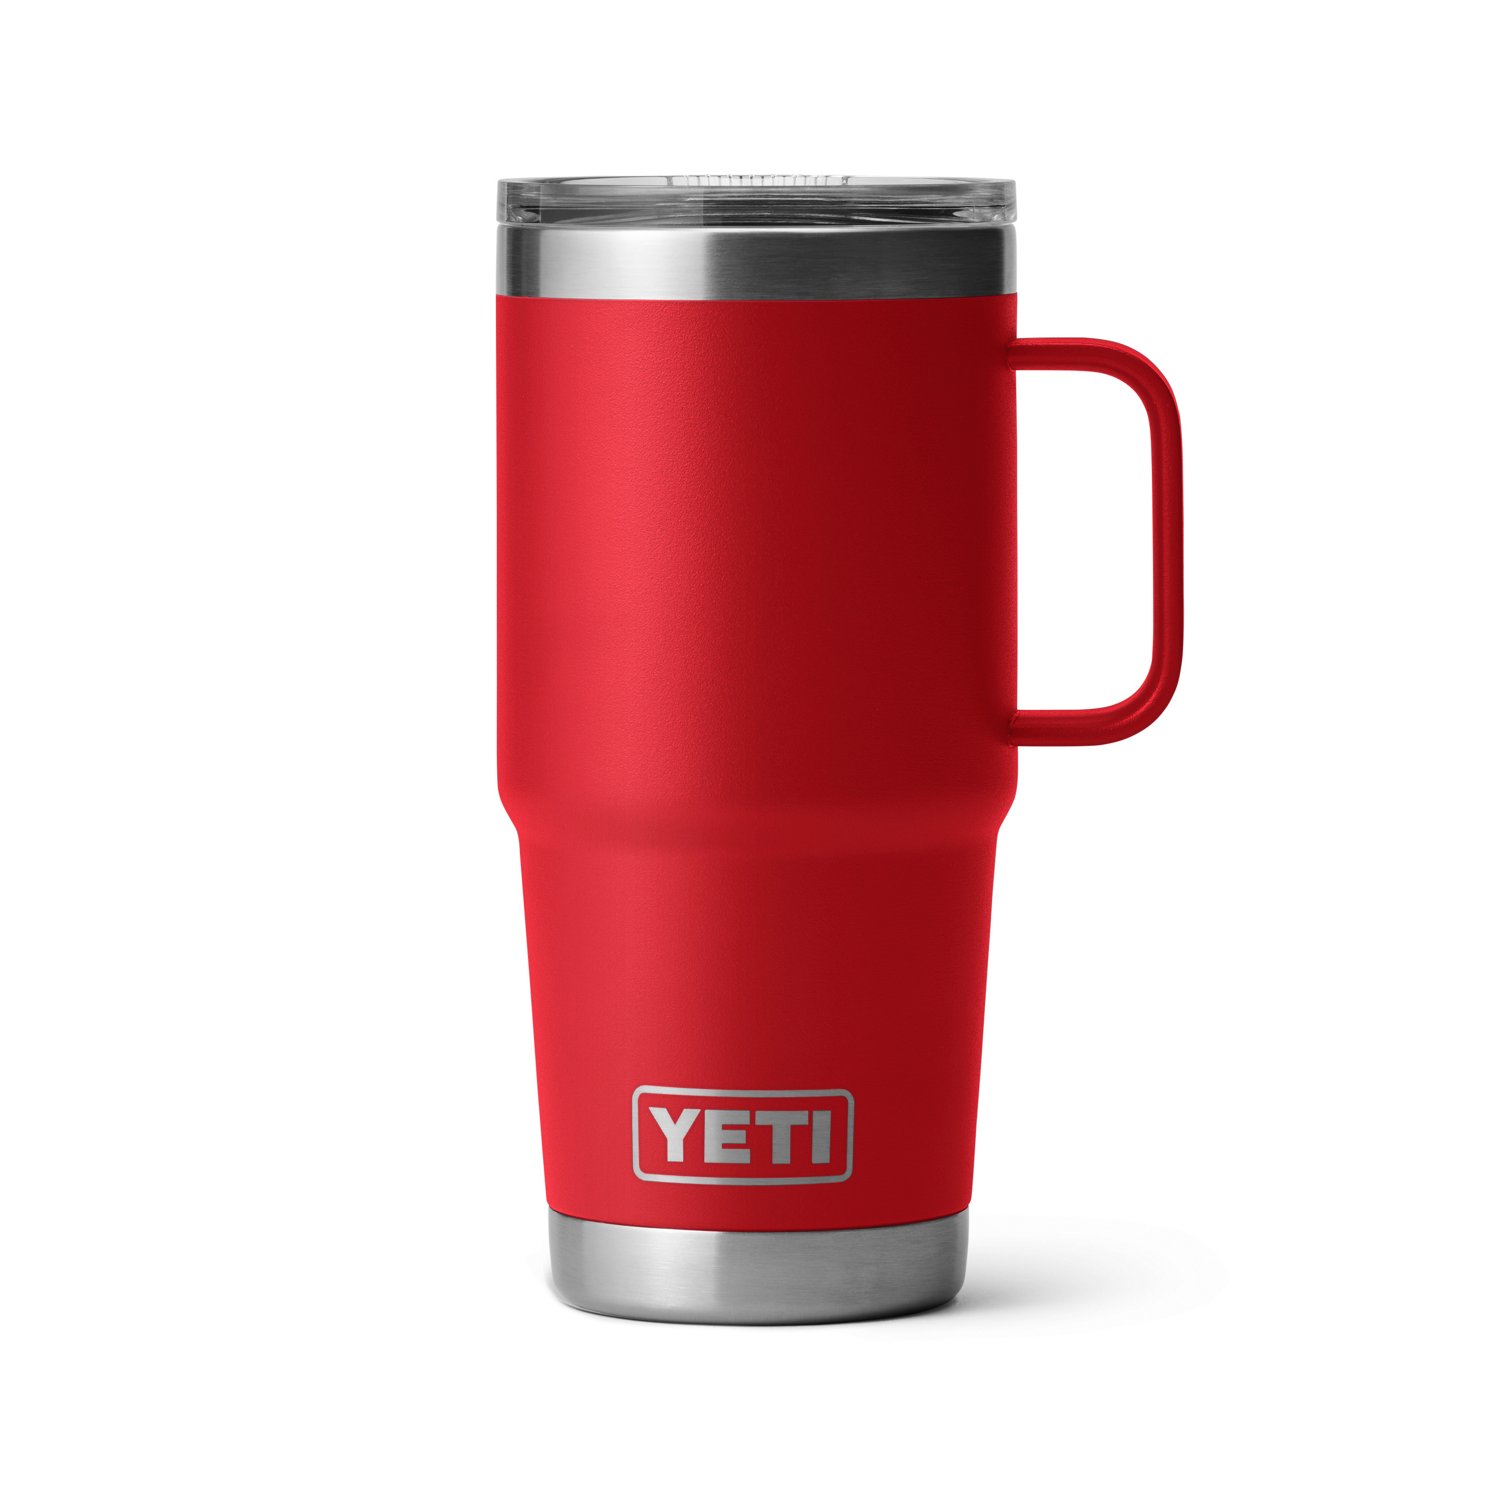 https://academy.scene7.com/is/image/academy//drinkware/yeti-rambler-20-oz-travel-mug-with-stronghold-lid-21071501392-red/fe4a88bbd8904ed5a1541f1afb486a91